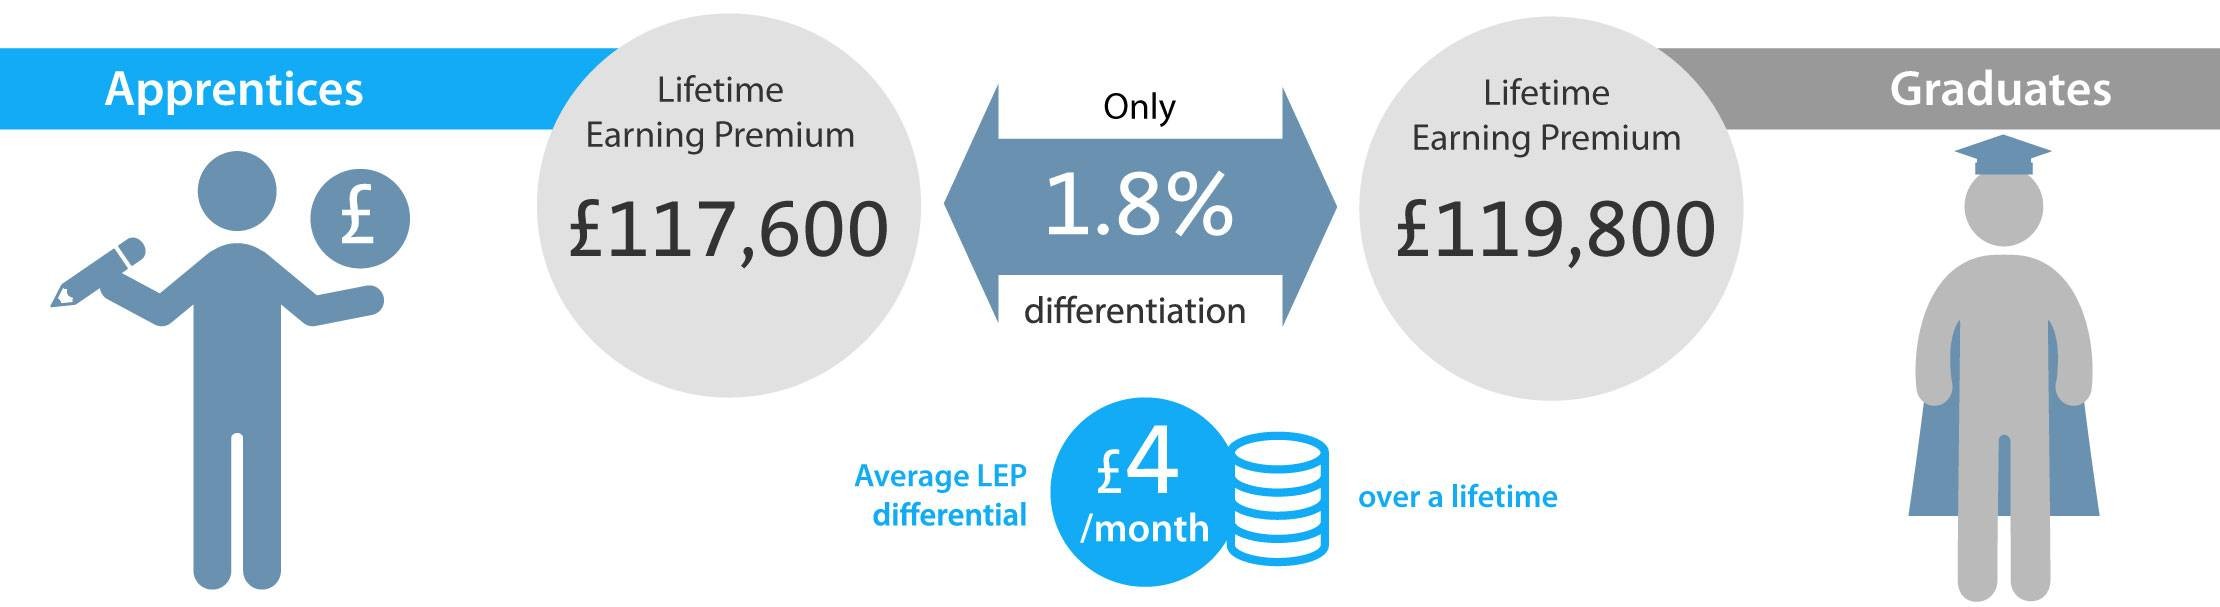 A comparison of the lifetime earnings of apprentices and graduates